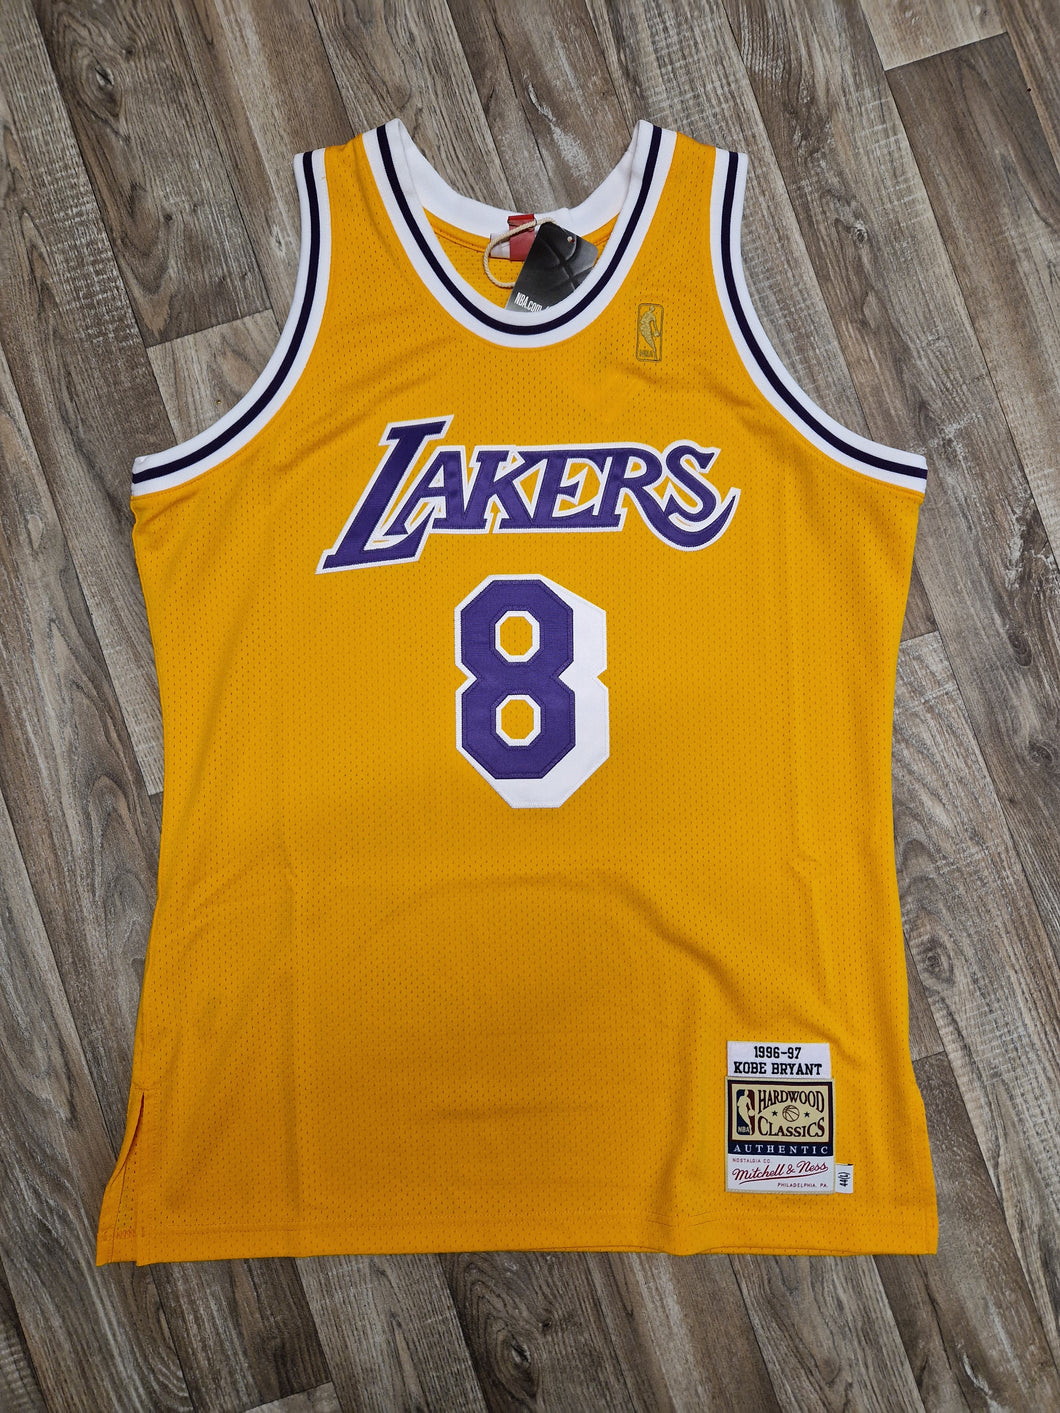 Kobe Bryant Authentic Los Angeles Lakers Jersey Size Large